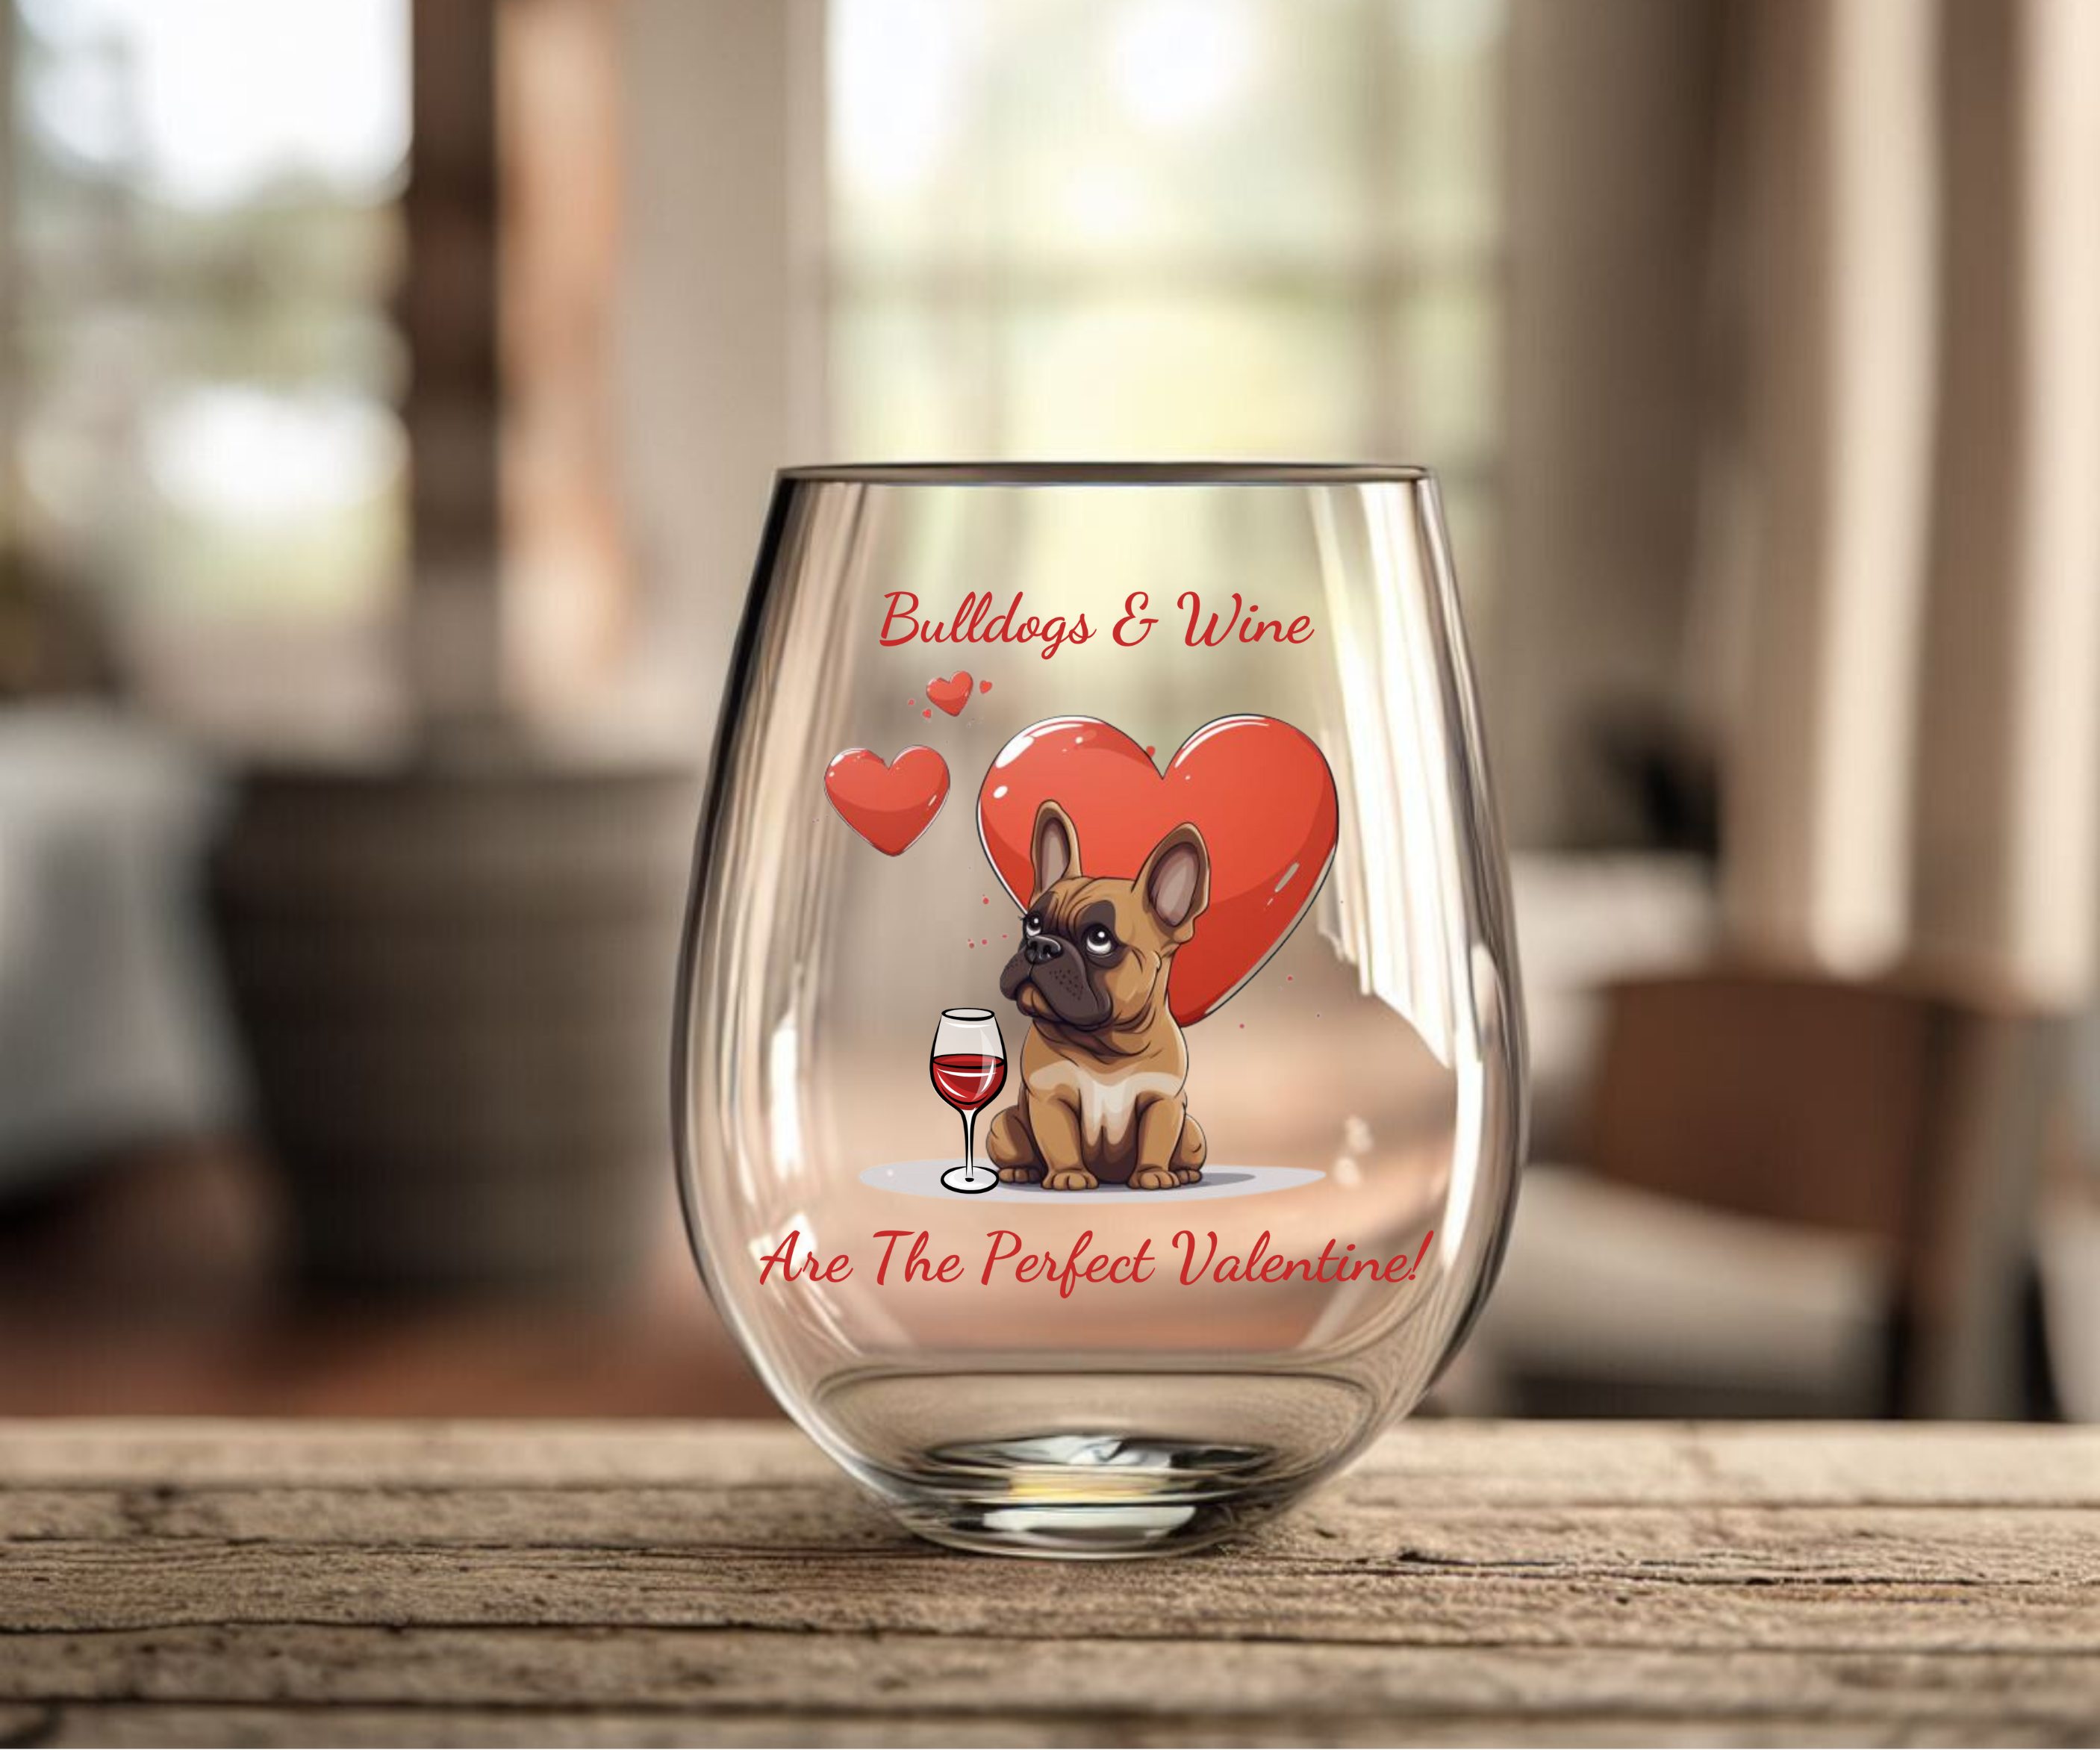 Bulldogs & Wine Are the Perfect Valentine! Stemless Wine Glass - brown French